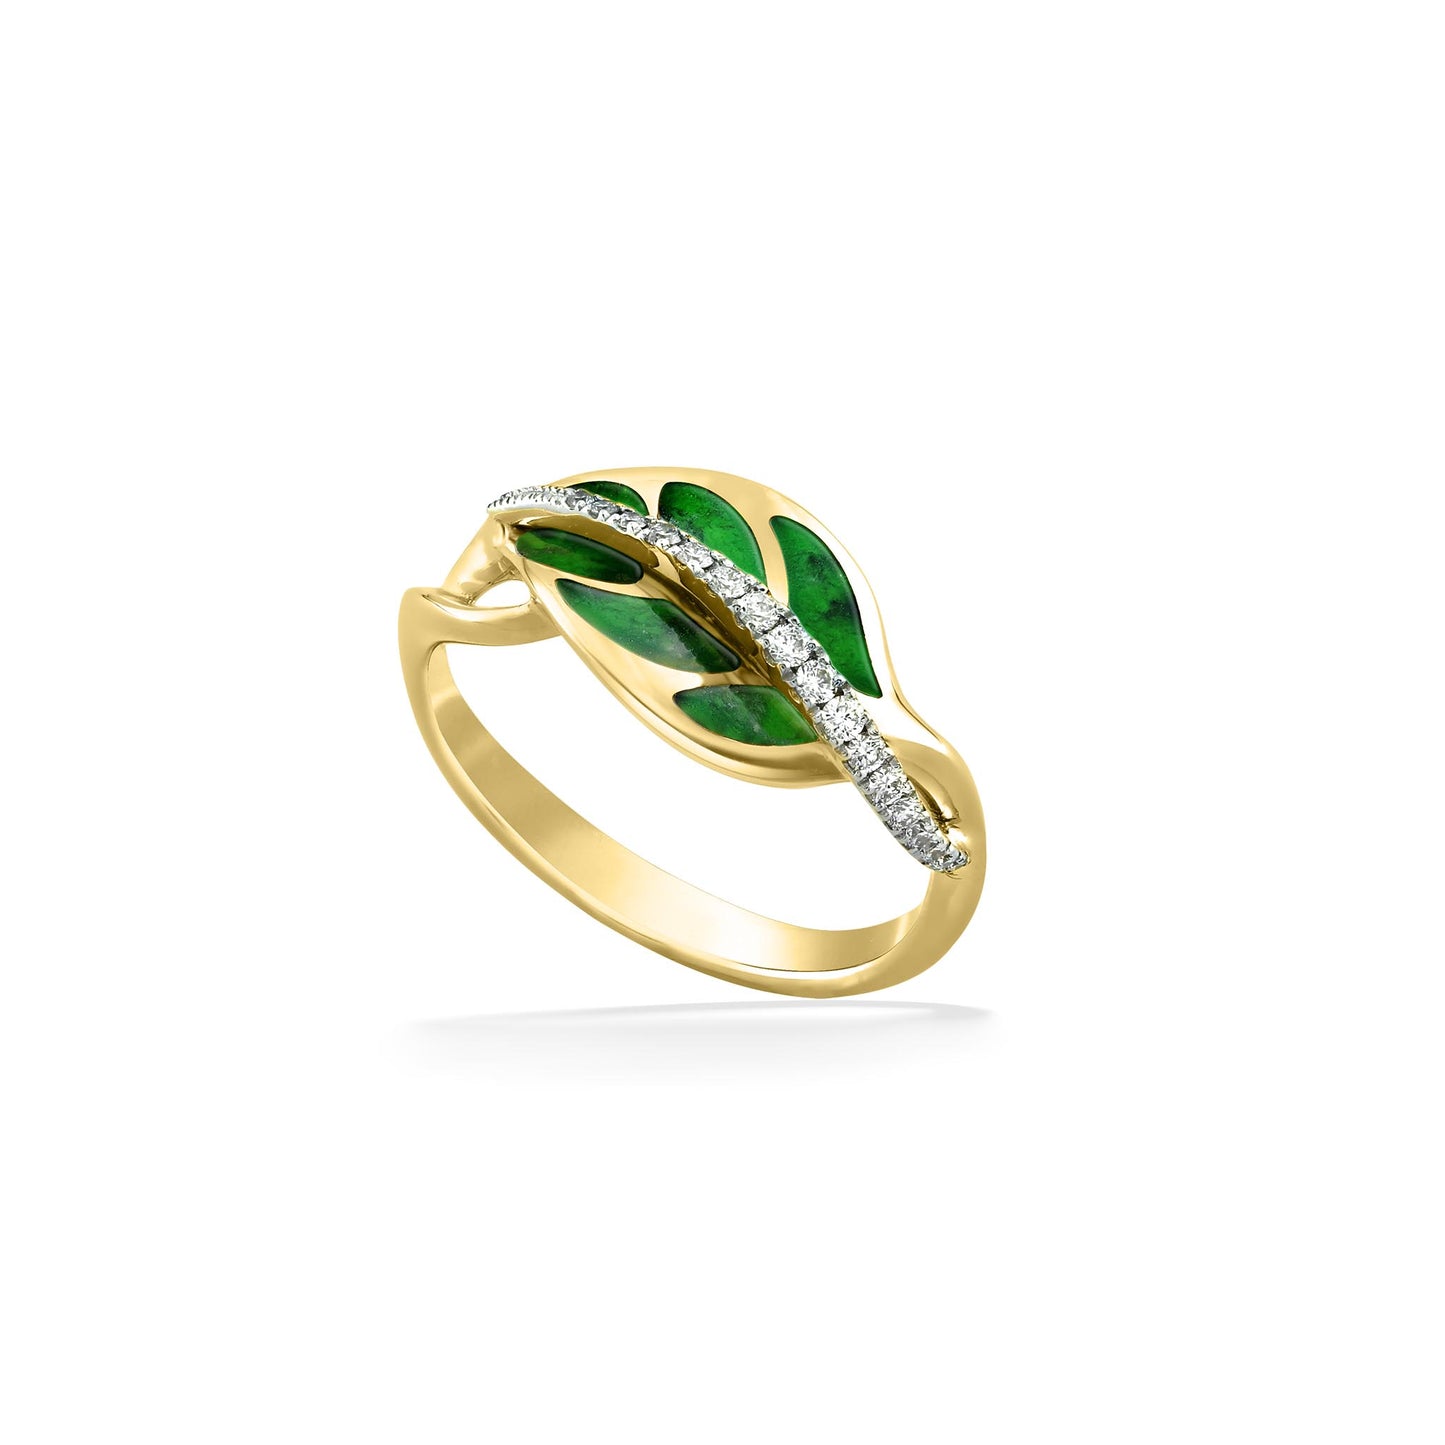 43027 - 14K Yellow Gold - Maile Leaf Ring